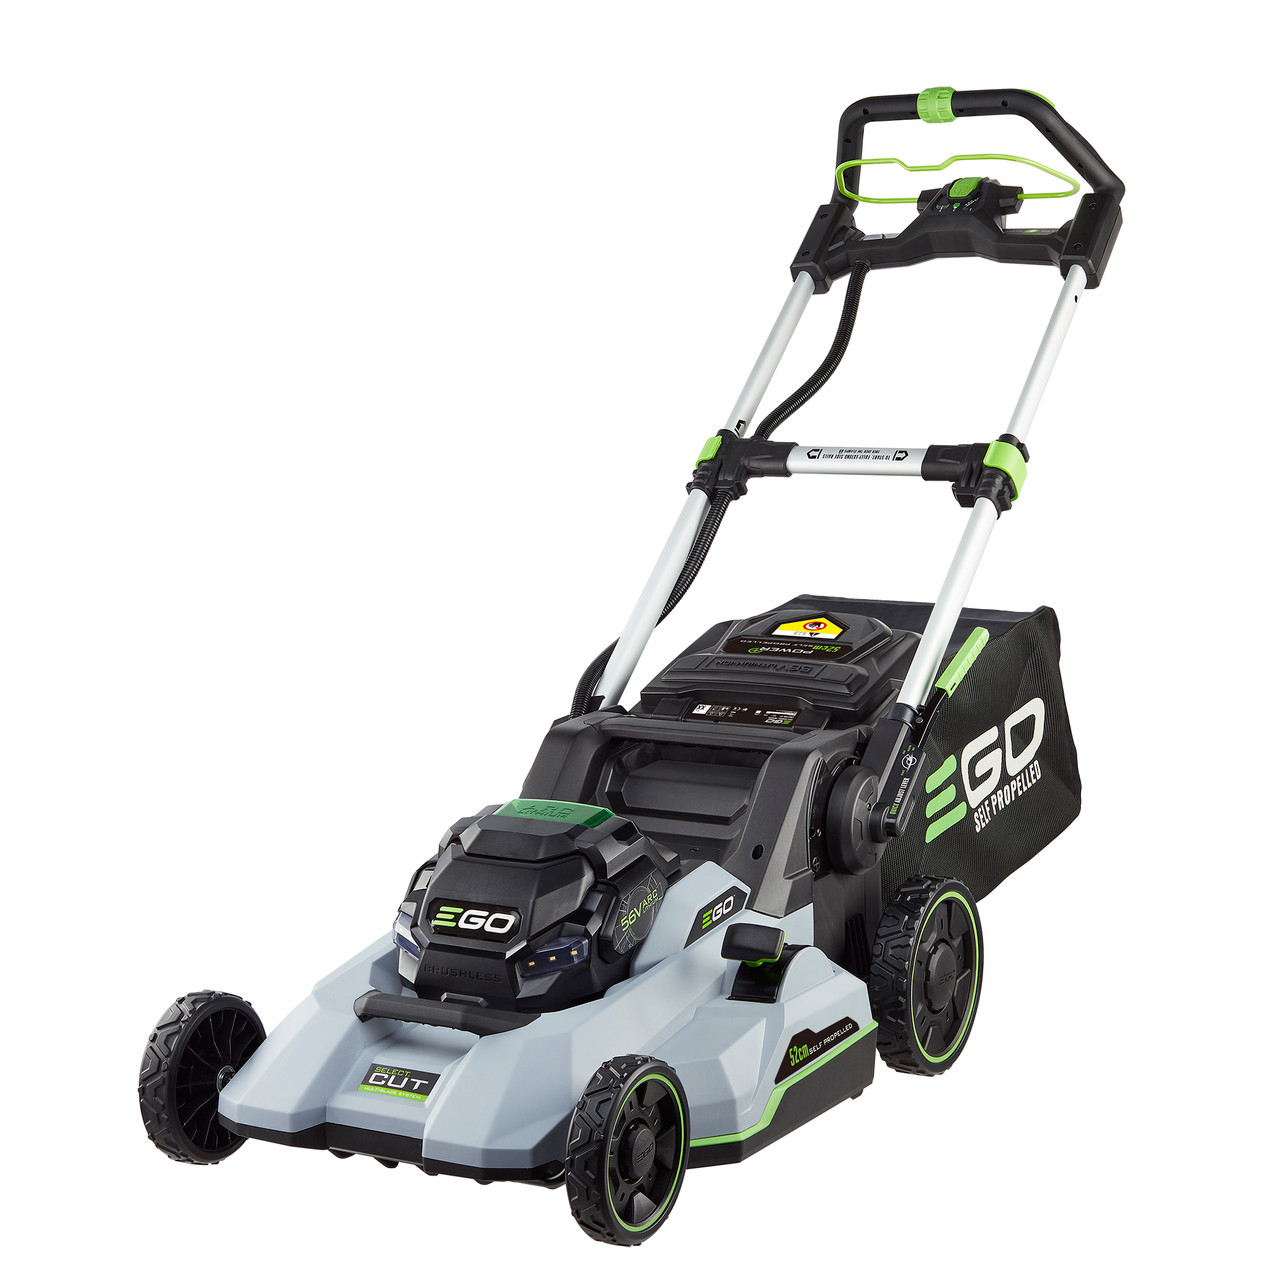 EGO POWER + 56V 52CM SELECT CUT Multi Blade Self Propelled Mower Kit
Includes 7.5Ah Battery & Rapid Charger